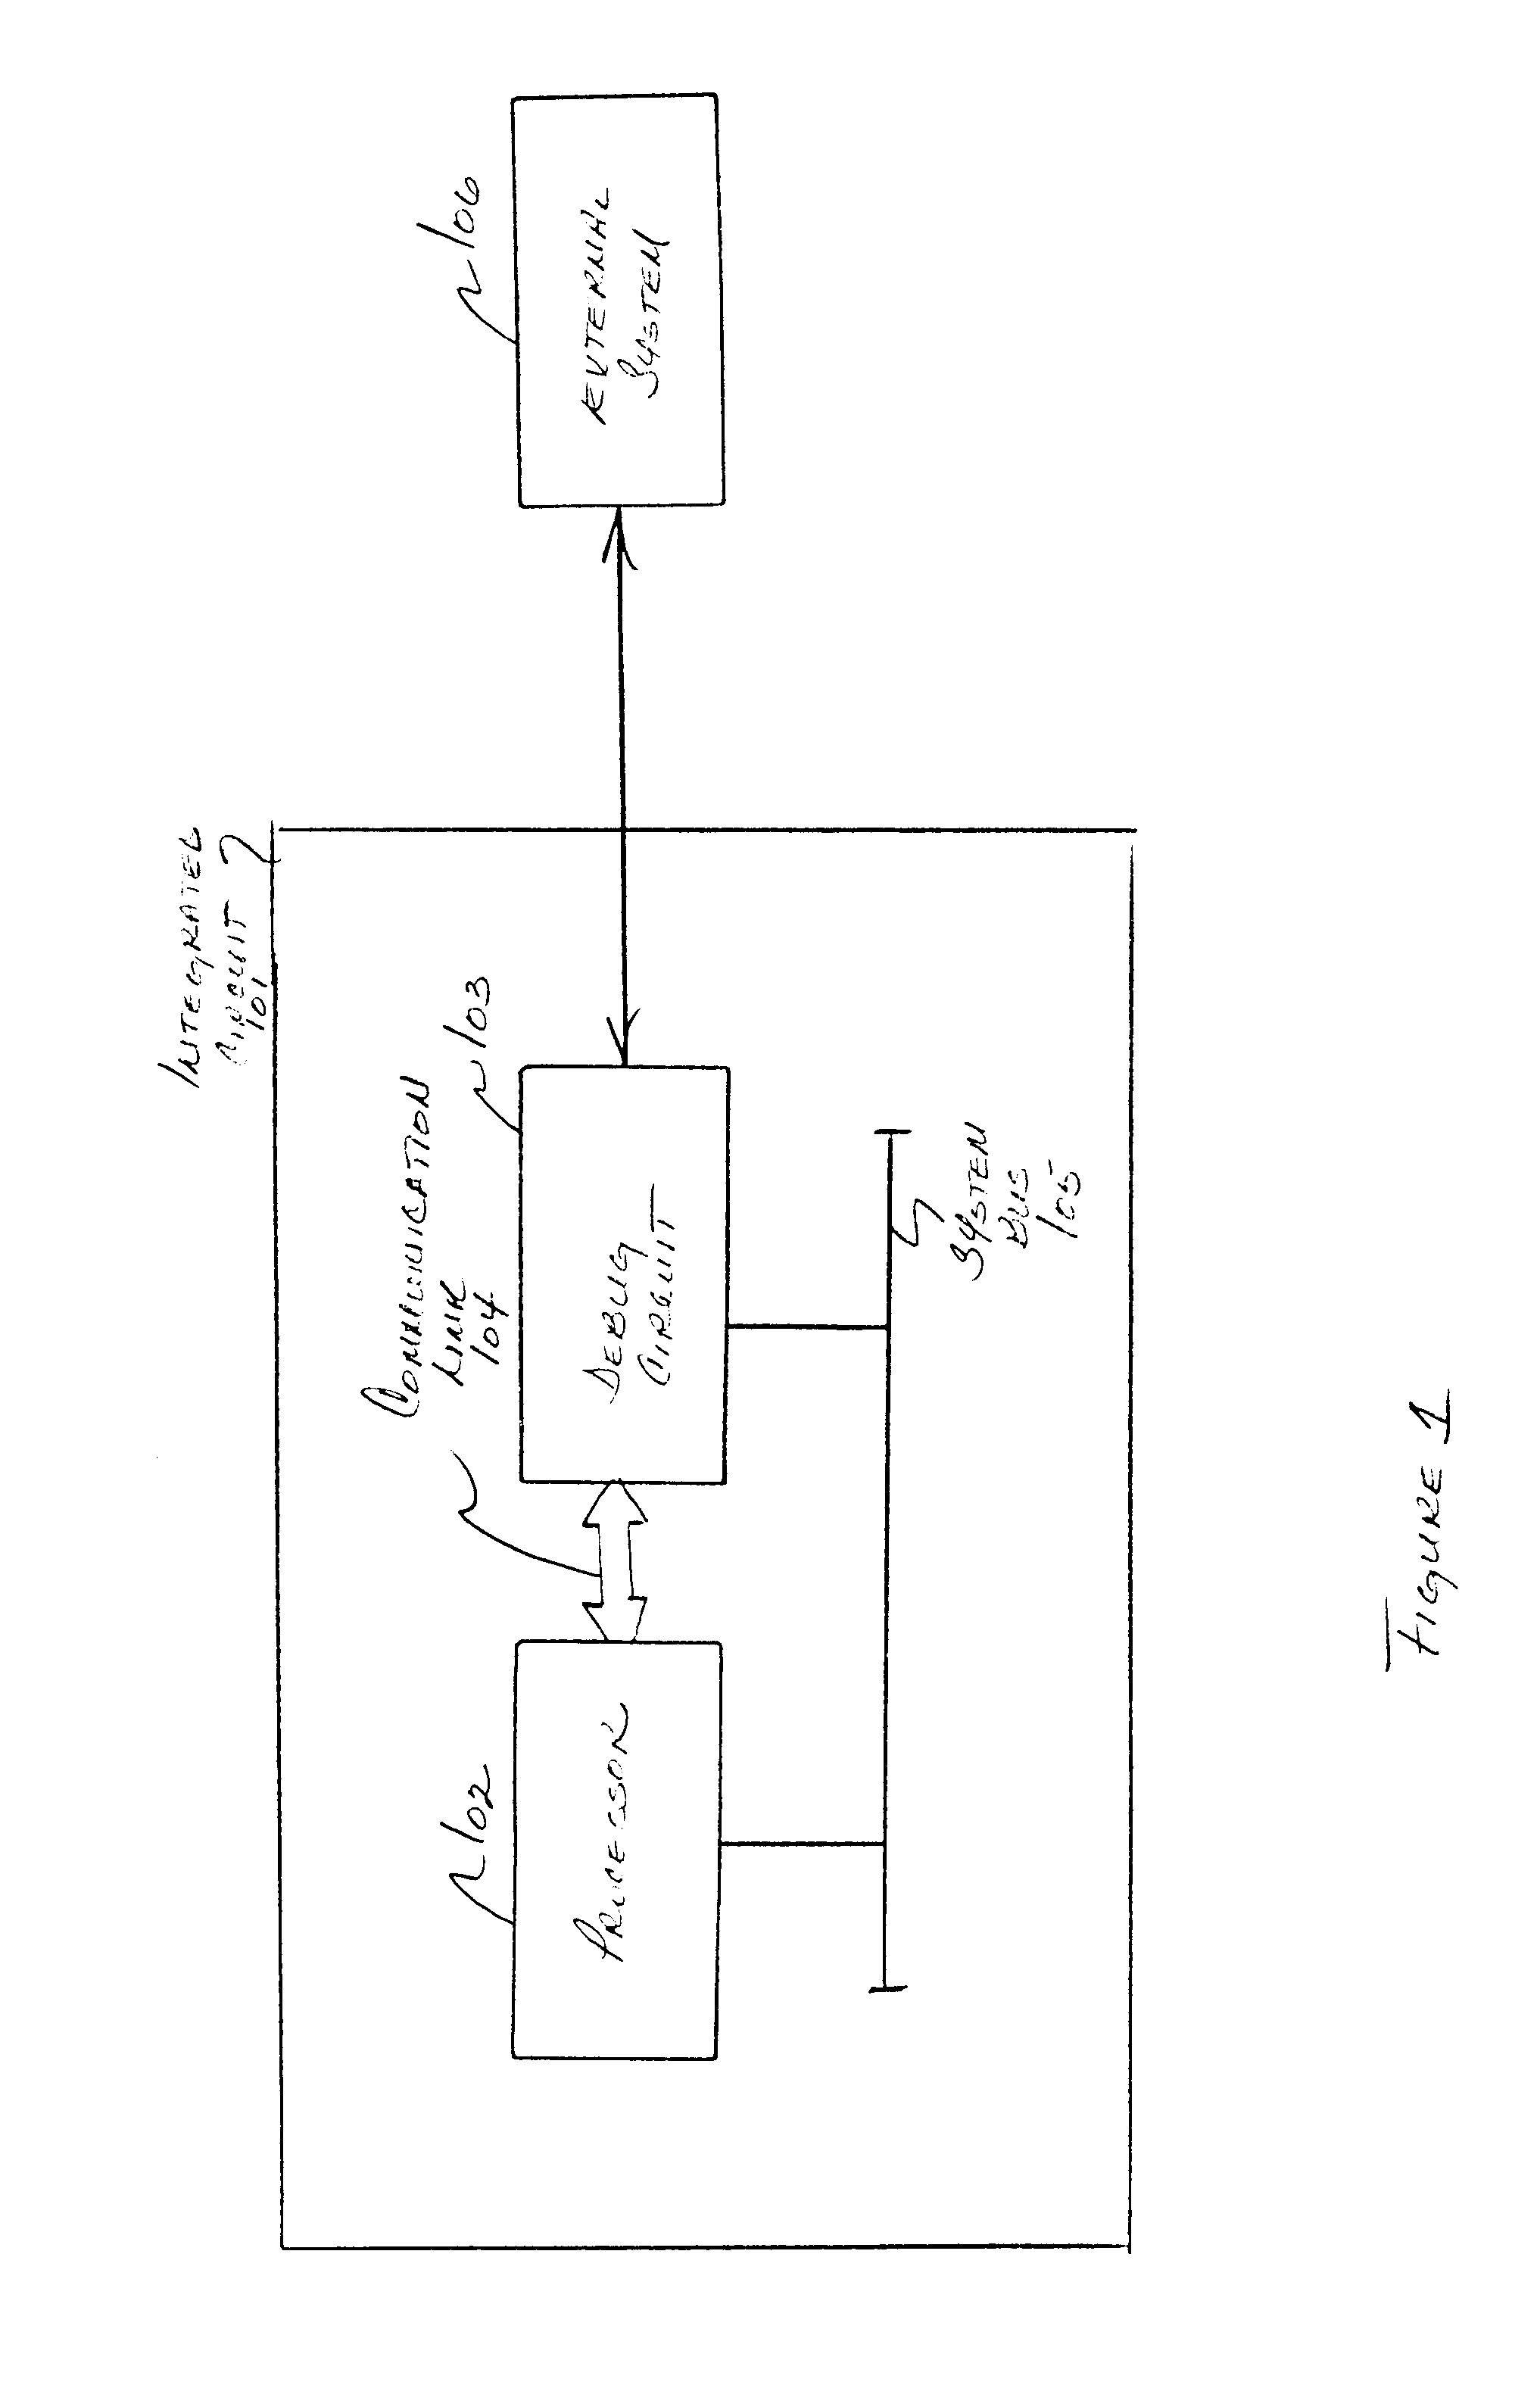 Circuit for processing trace information